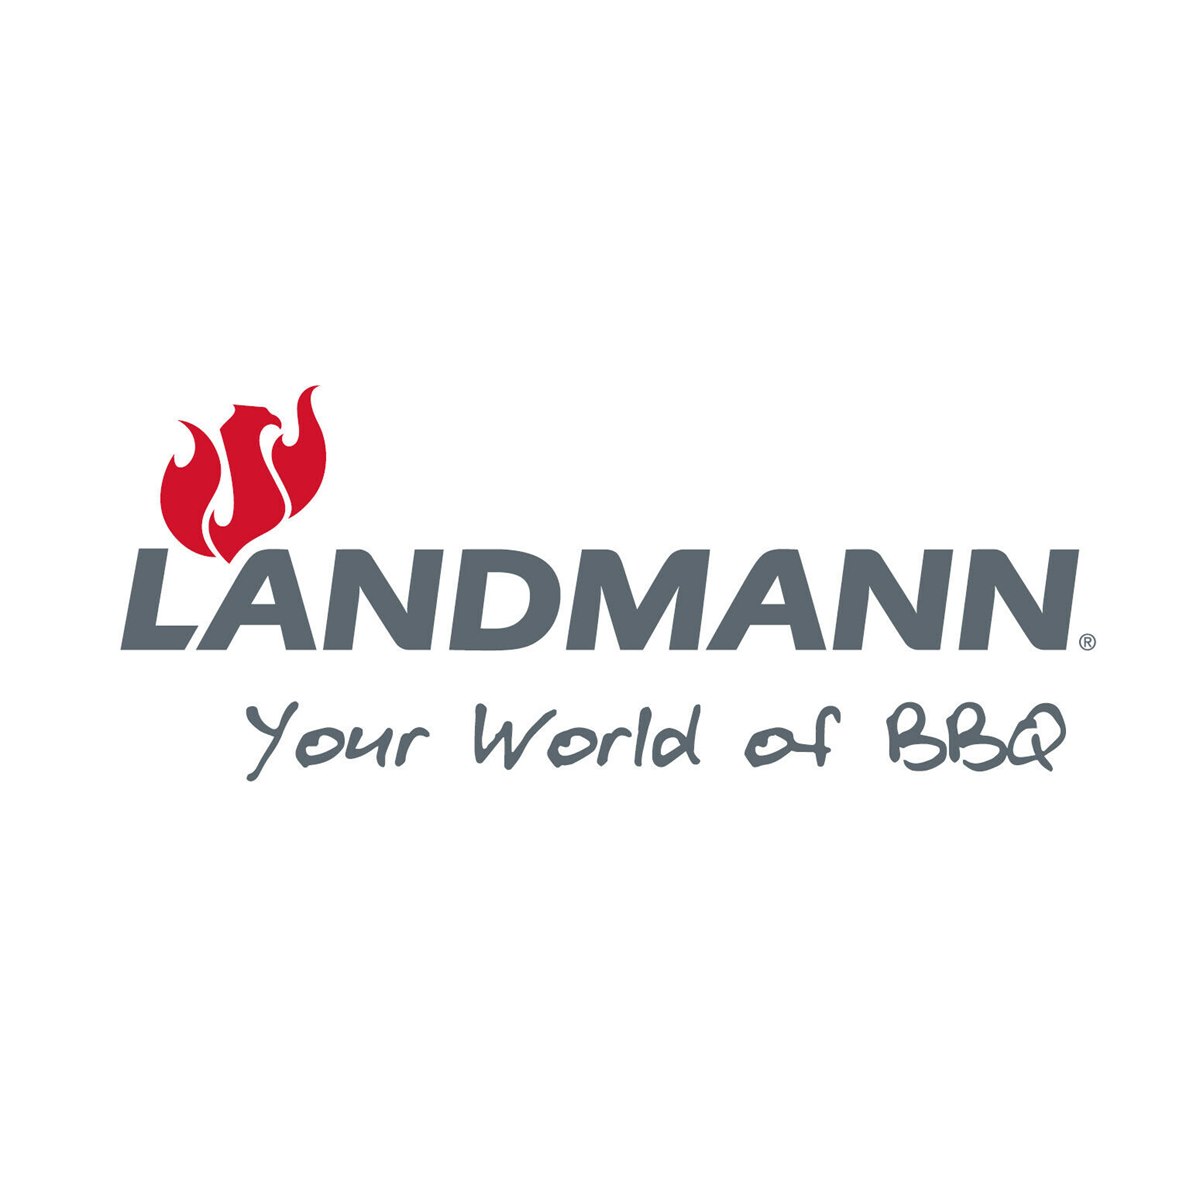 Where to Buy Landmann Products